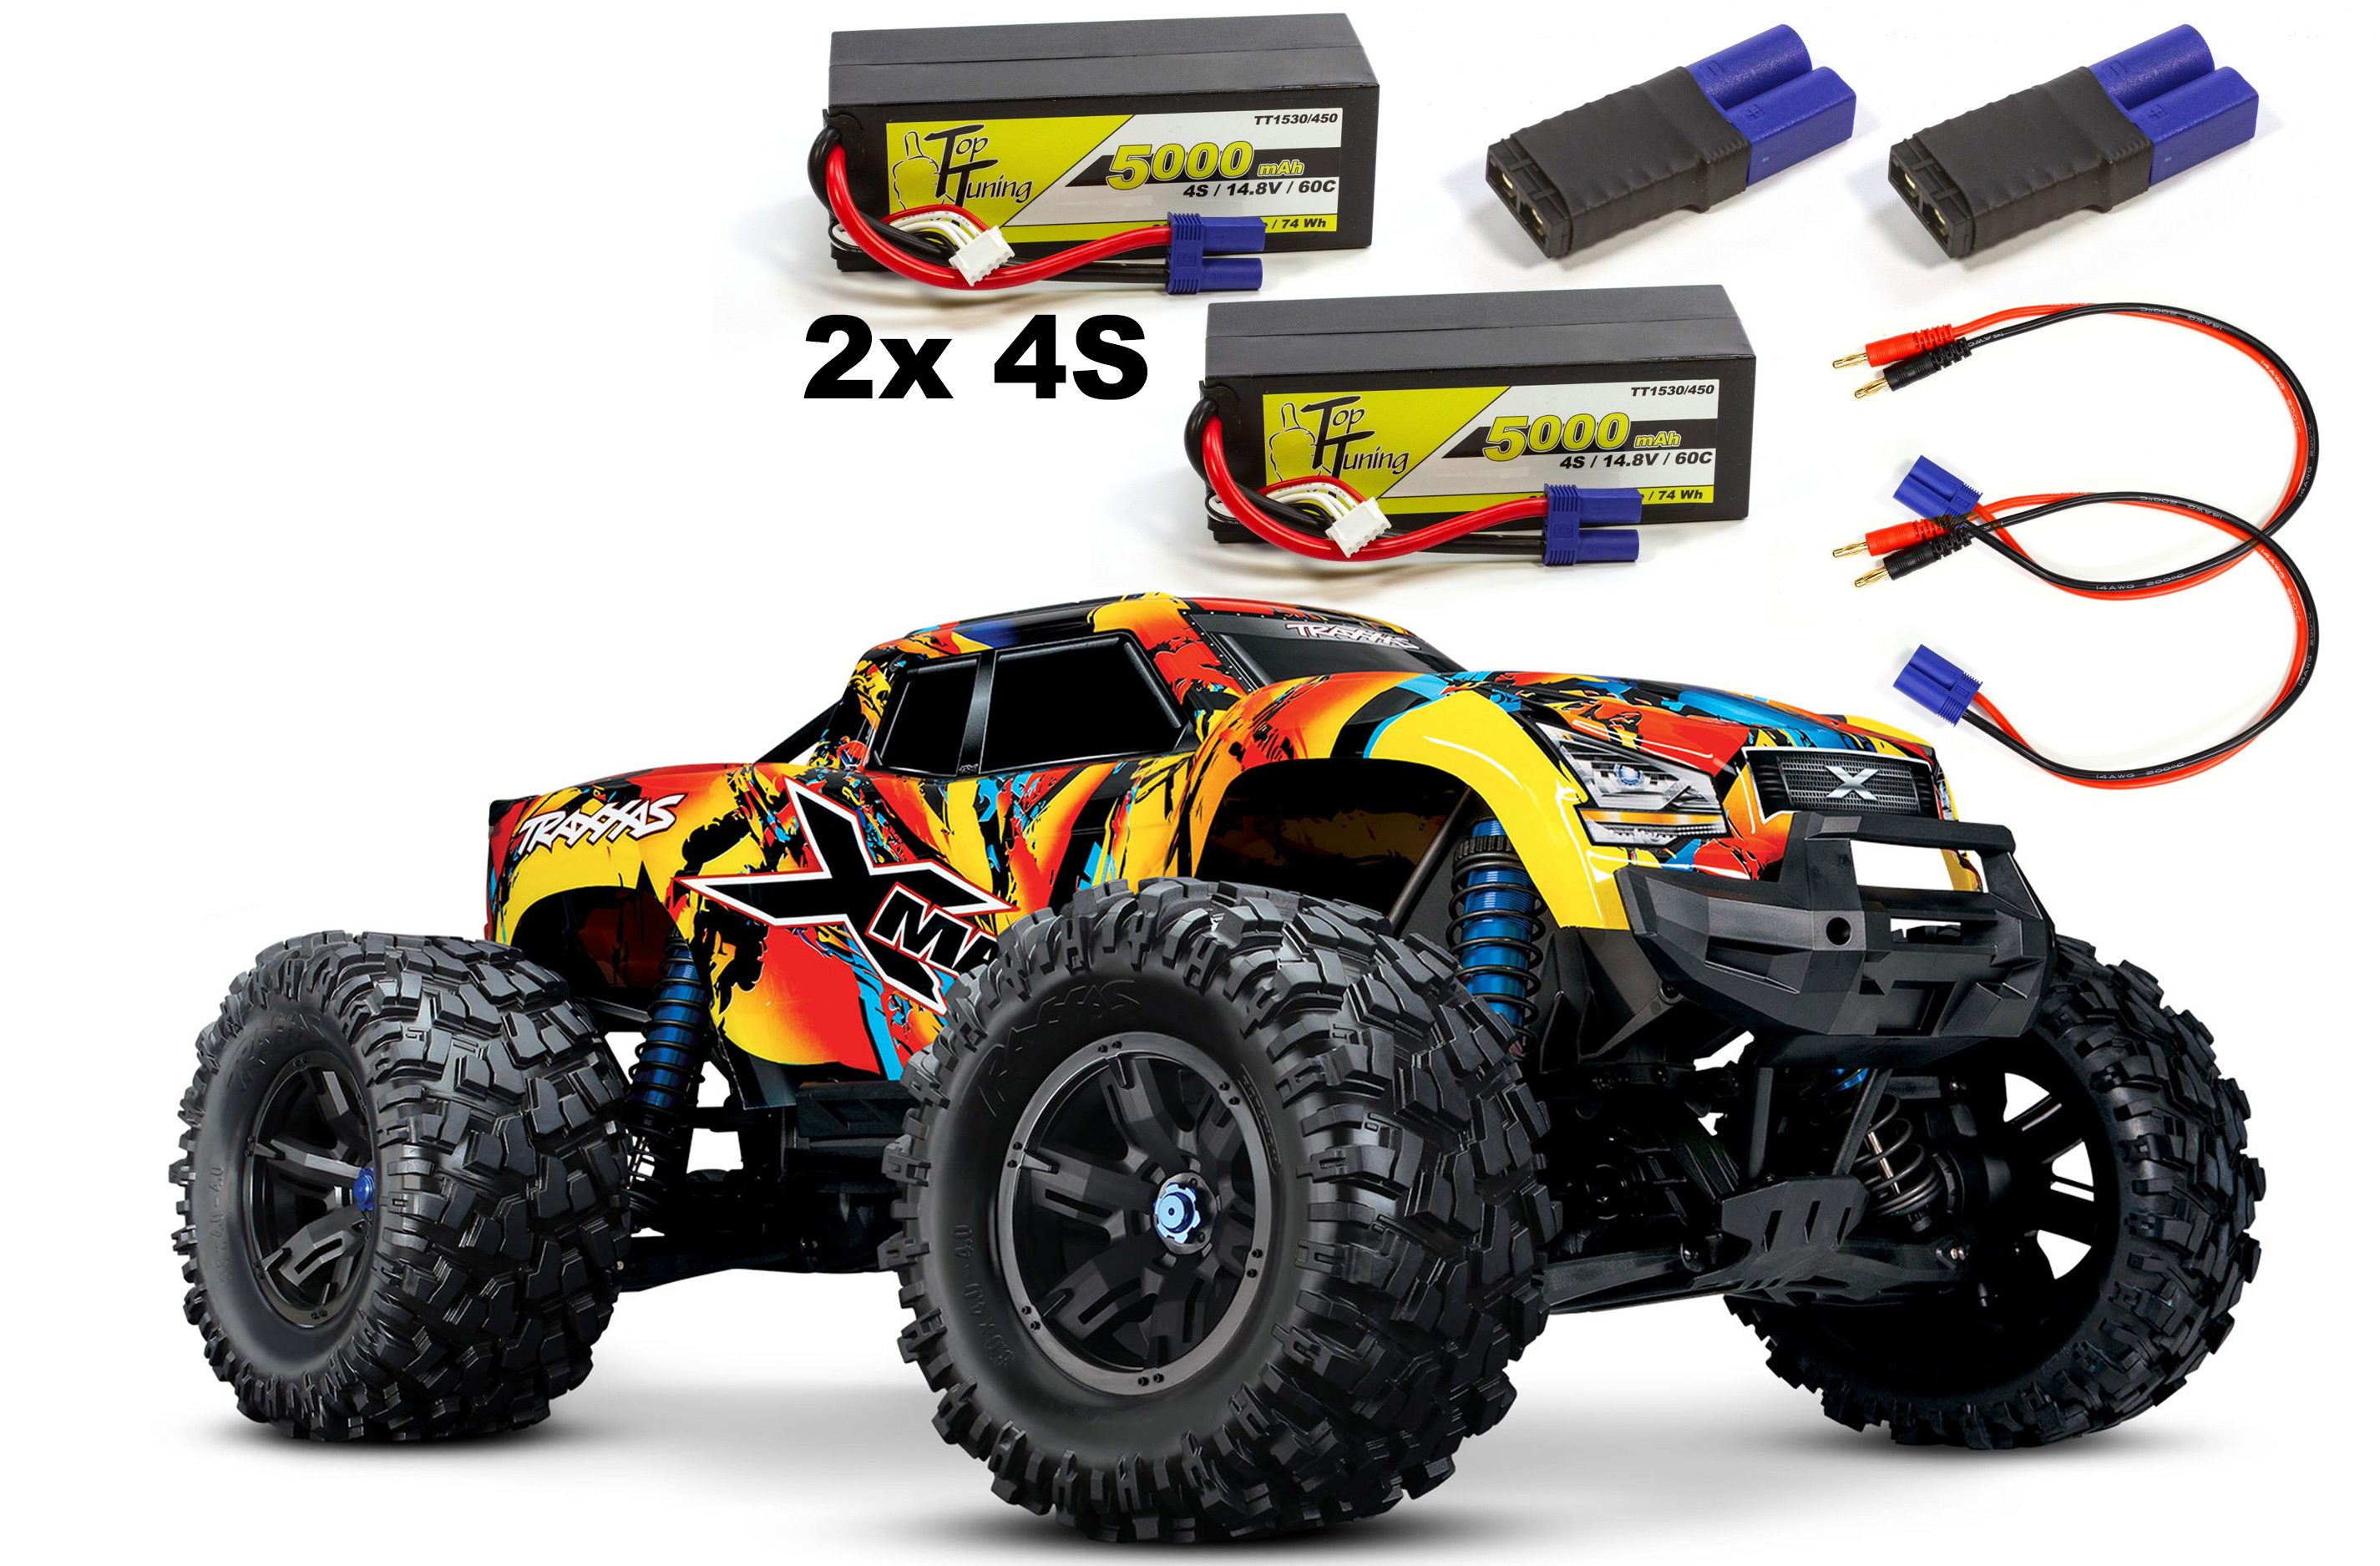 Traxxas X-MAXX 4x4 new 8S version RTR complete set with 2x 4S / 5000 mAh batteries